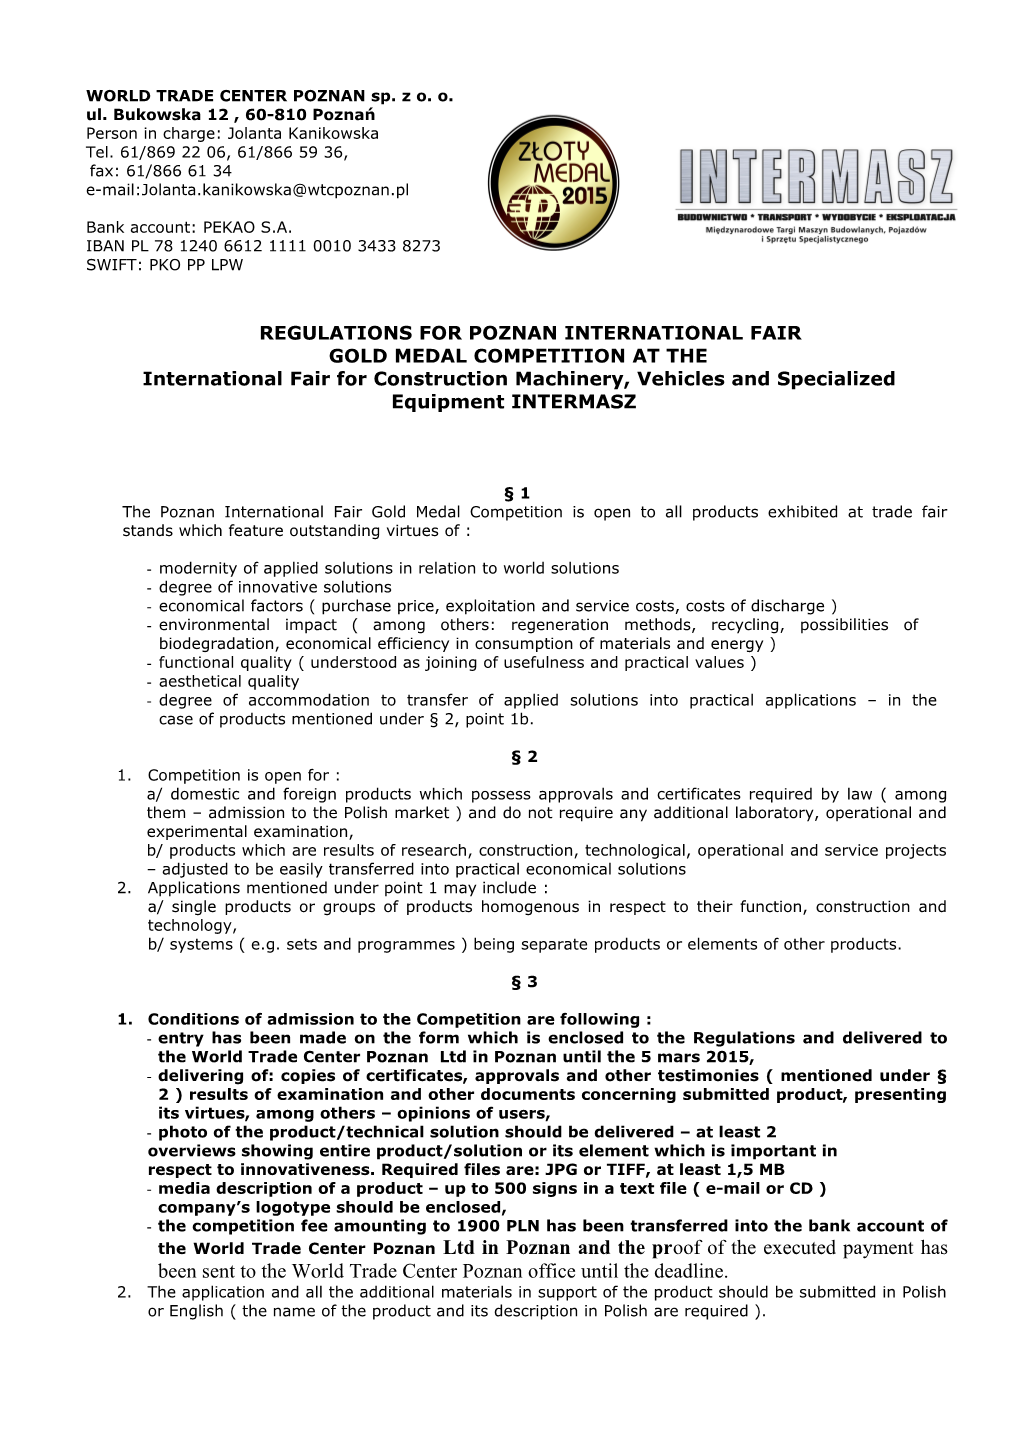 Regulations for Poznan International Fair Gold Medal Competition of the International Fair